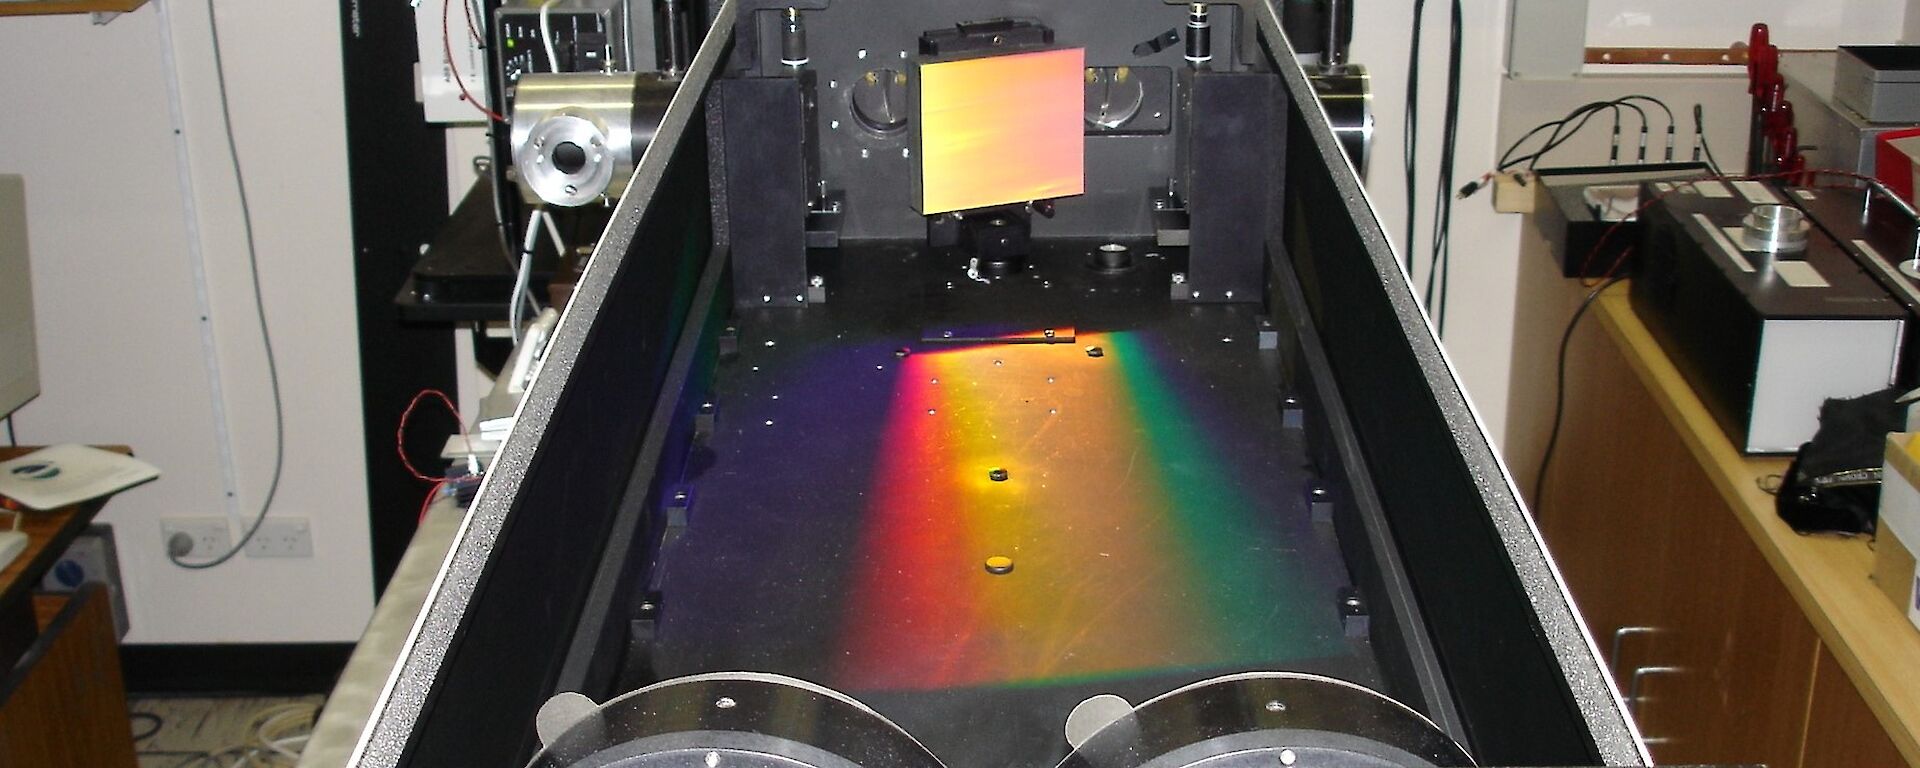 Spectrometer in the optical laboratory at Davis station, Antarctica — looks like a rainbow in a metal box